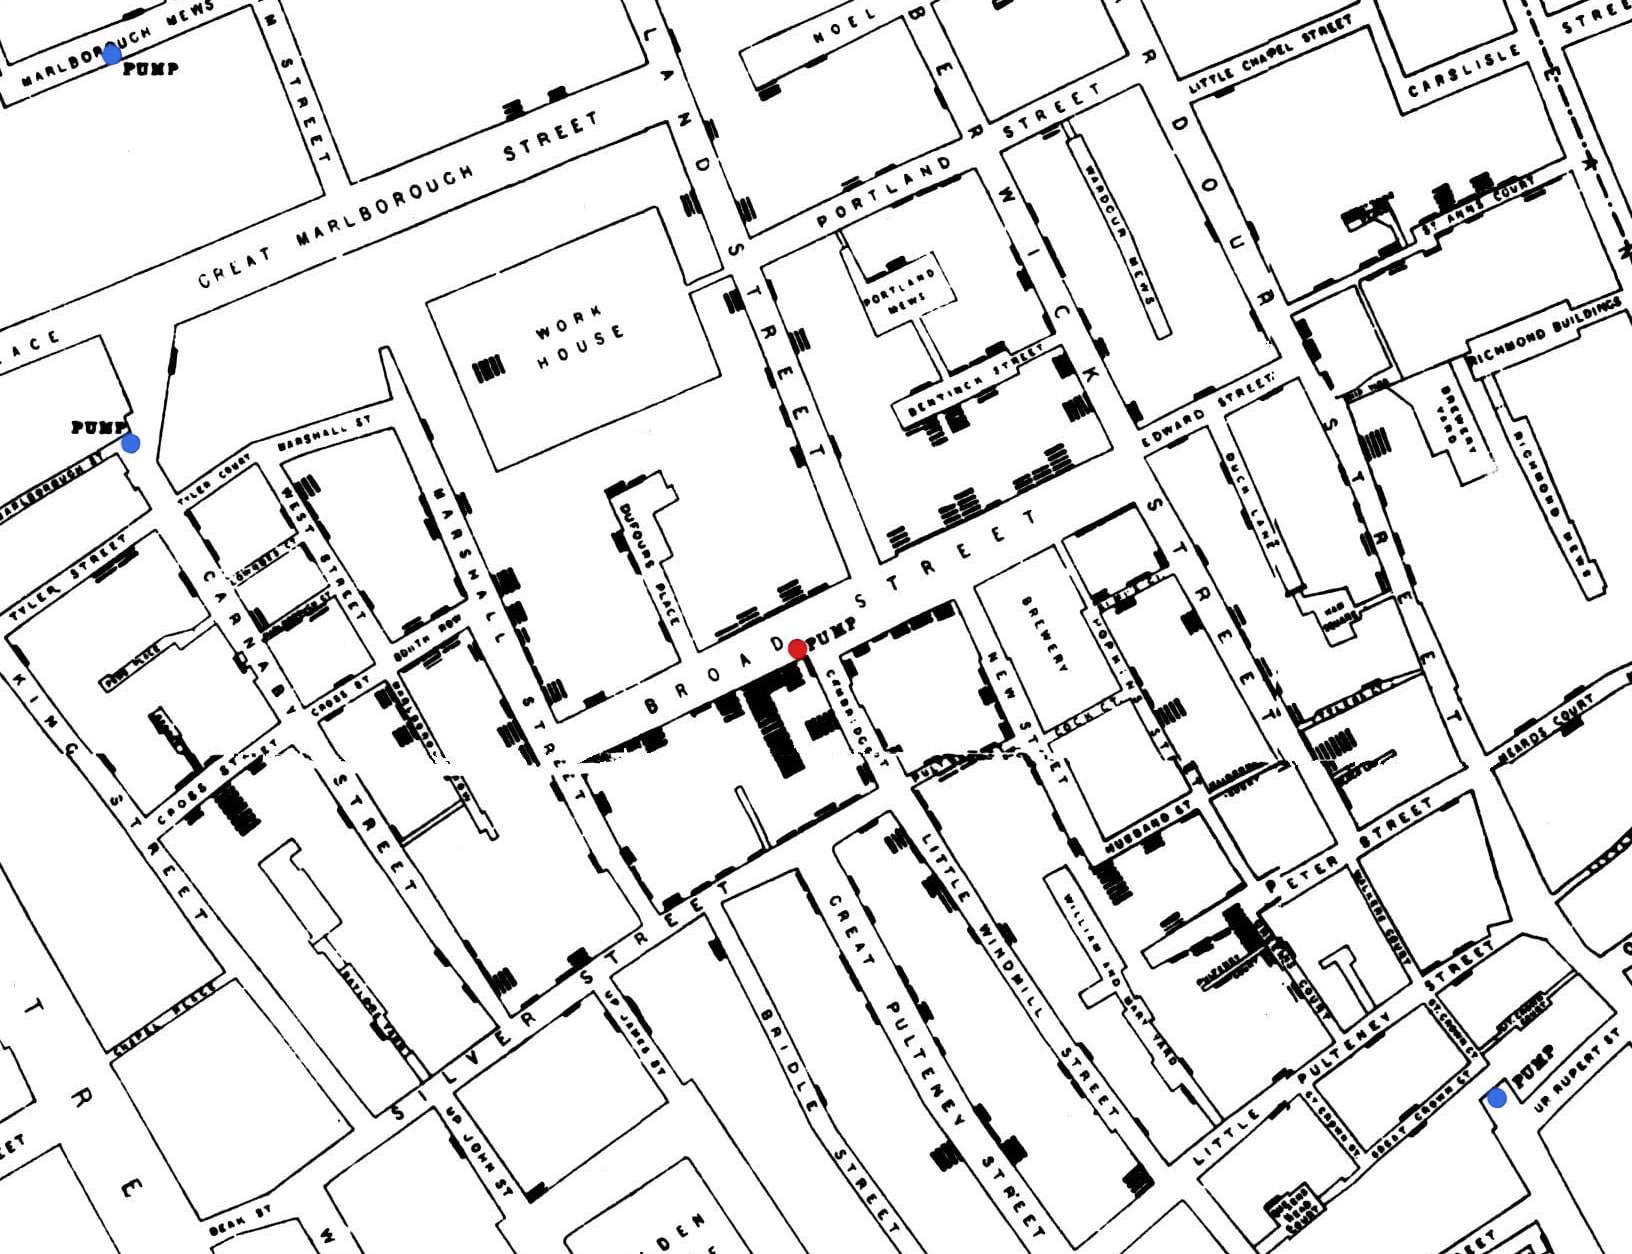 Excerpt of John Snow's 1854 cholera map with colored points indicating water pump locations.